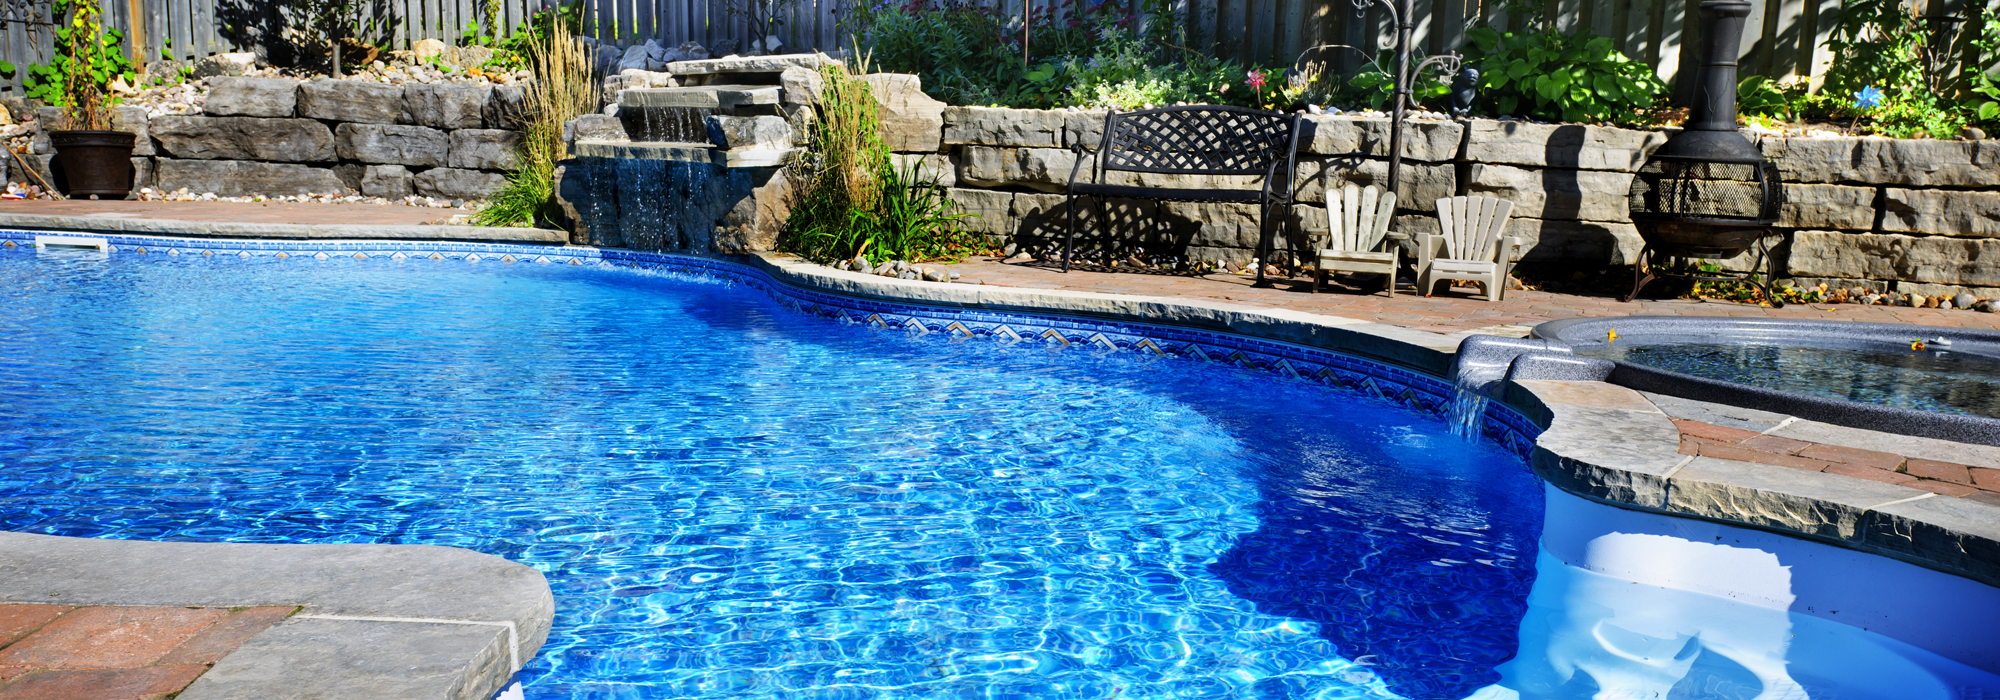 Myrtle Beach Residential Pool Services